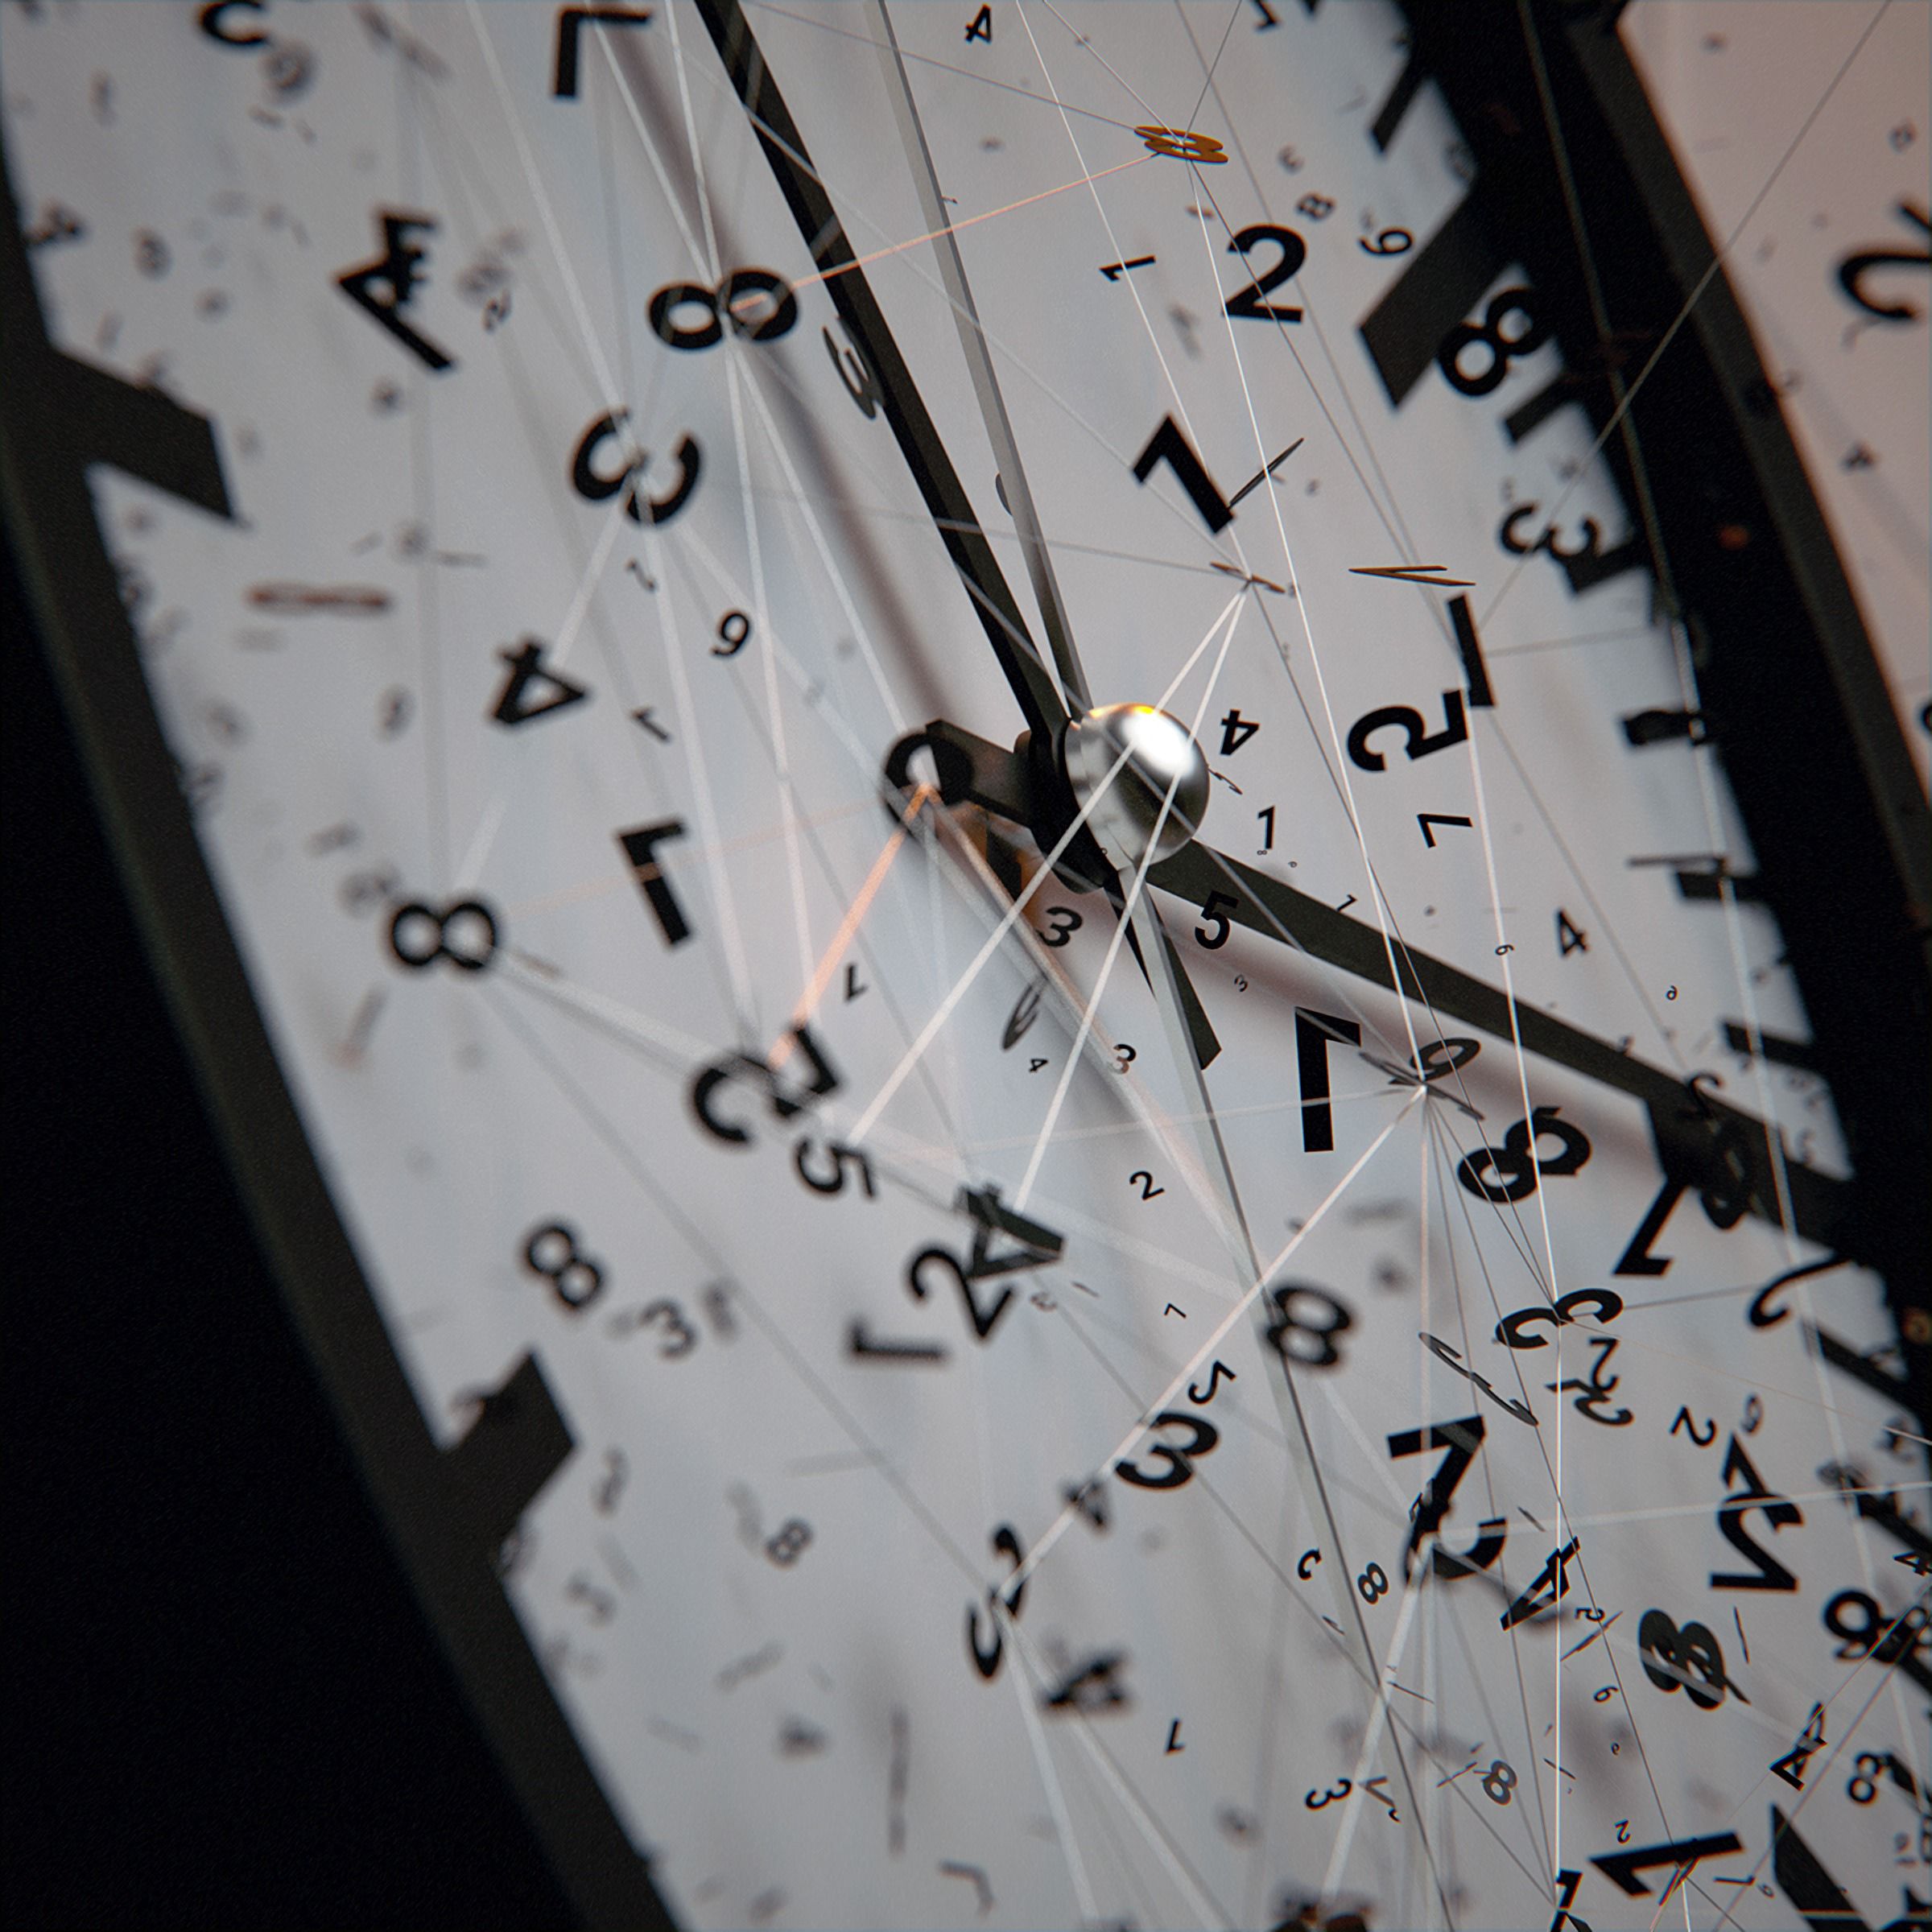 miscellanea, intricate, numbers, clock face, clock, dial, miscellaneous, lines, confused, arrows